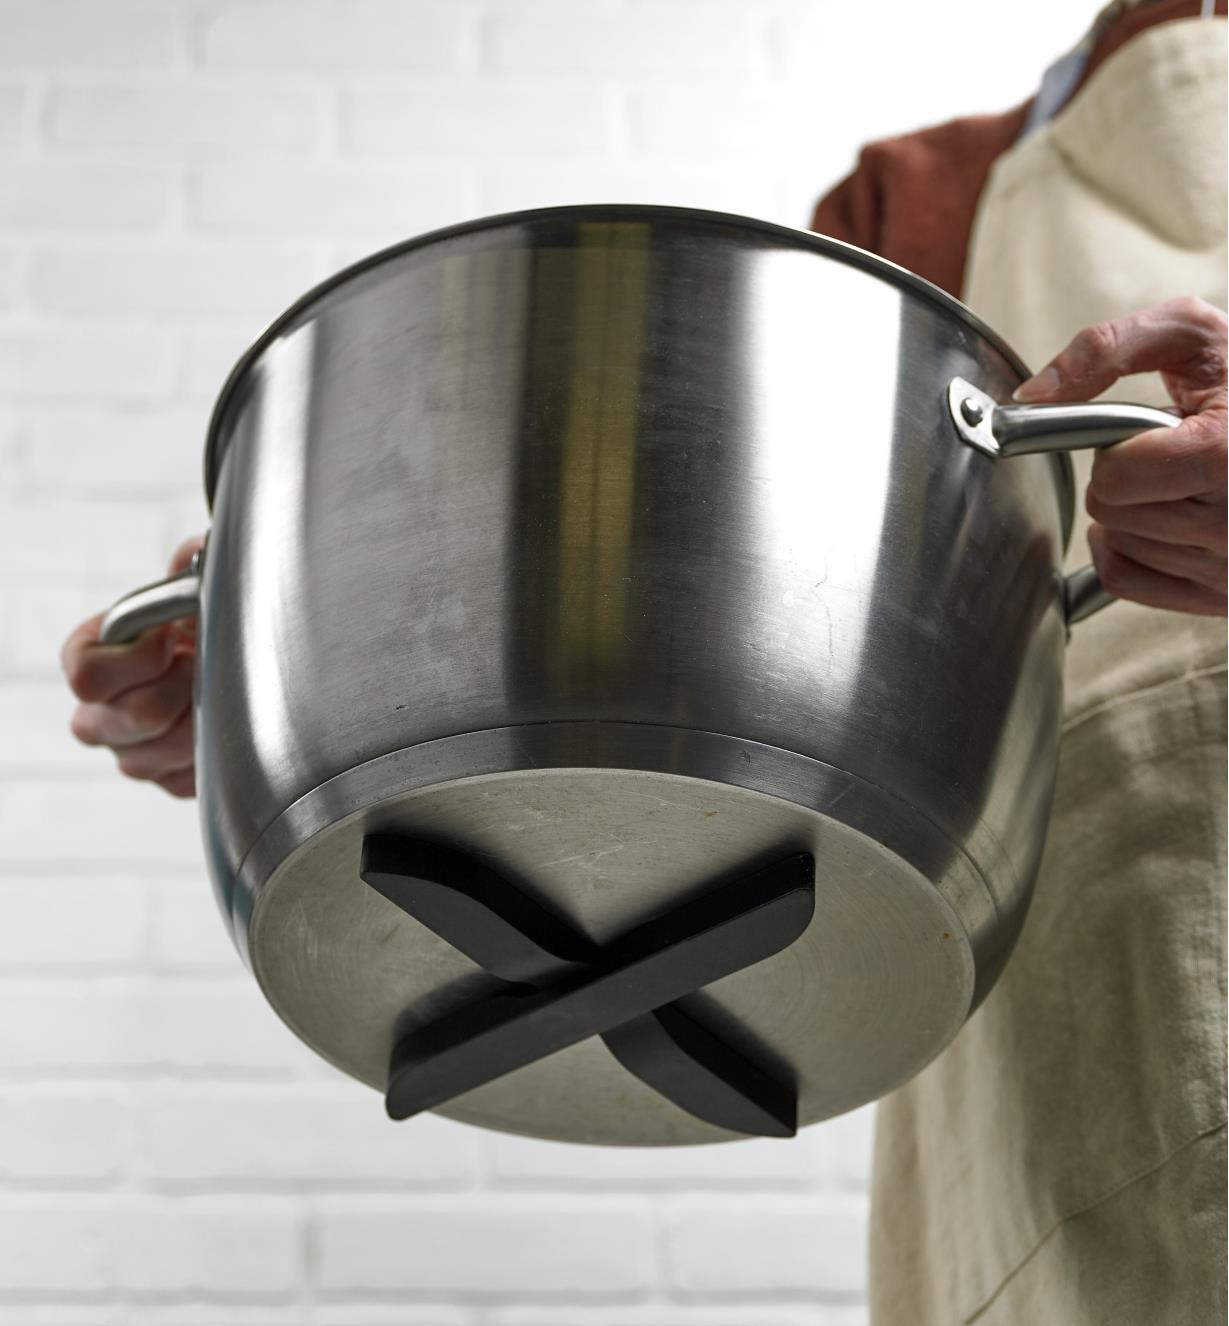 X-shaped magnetic trivet attached to the bottom of a steel pot